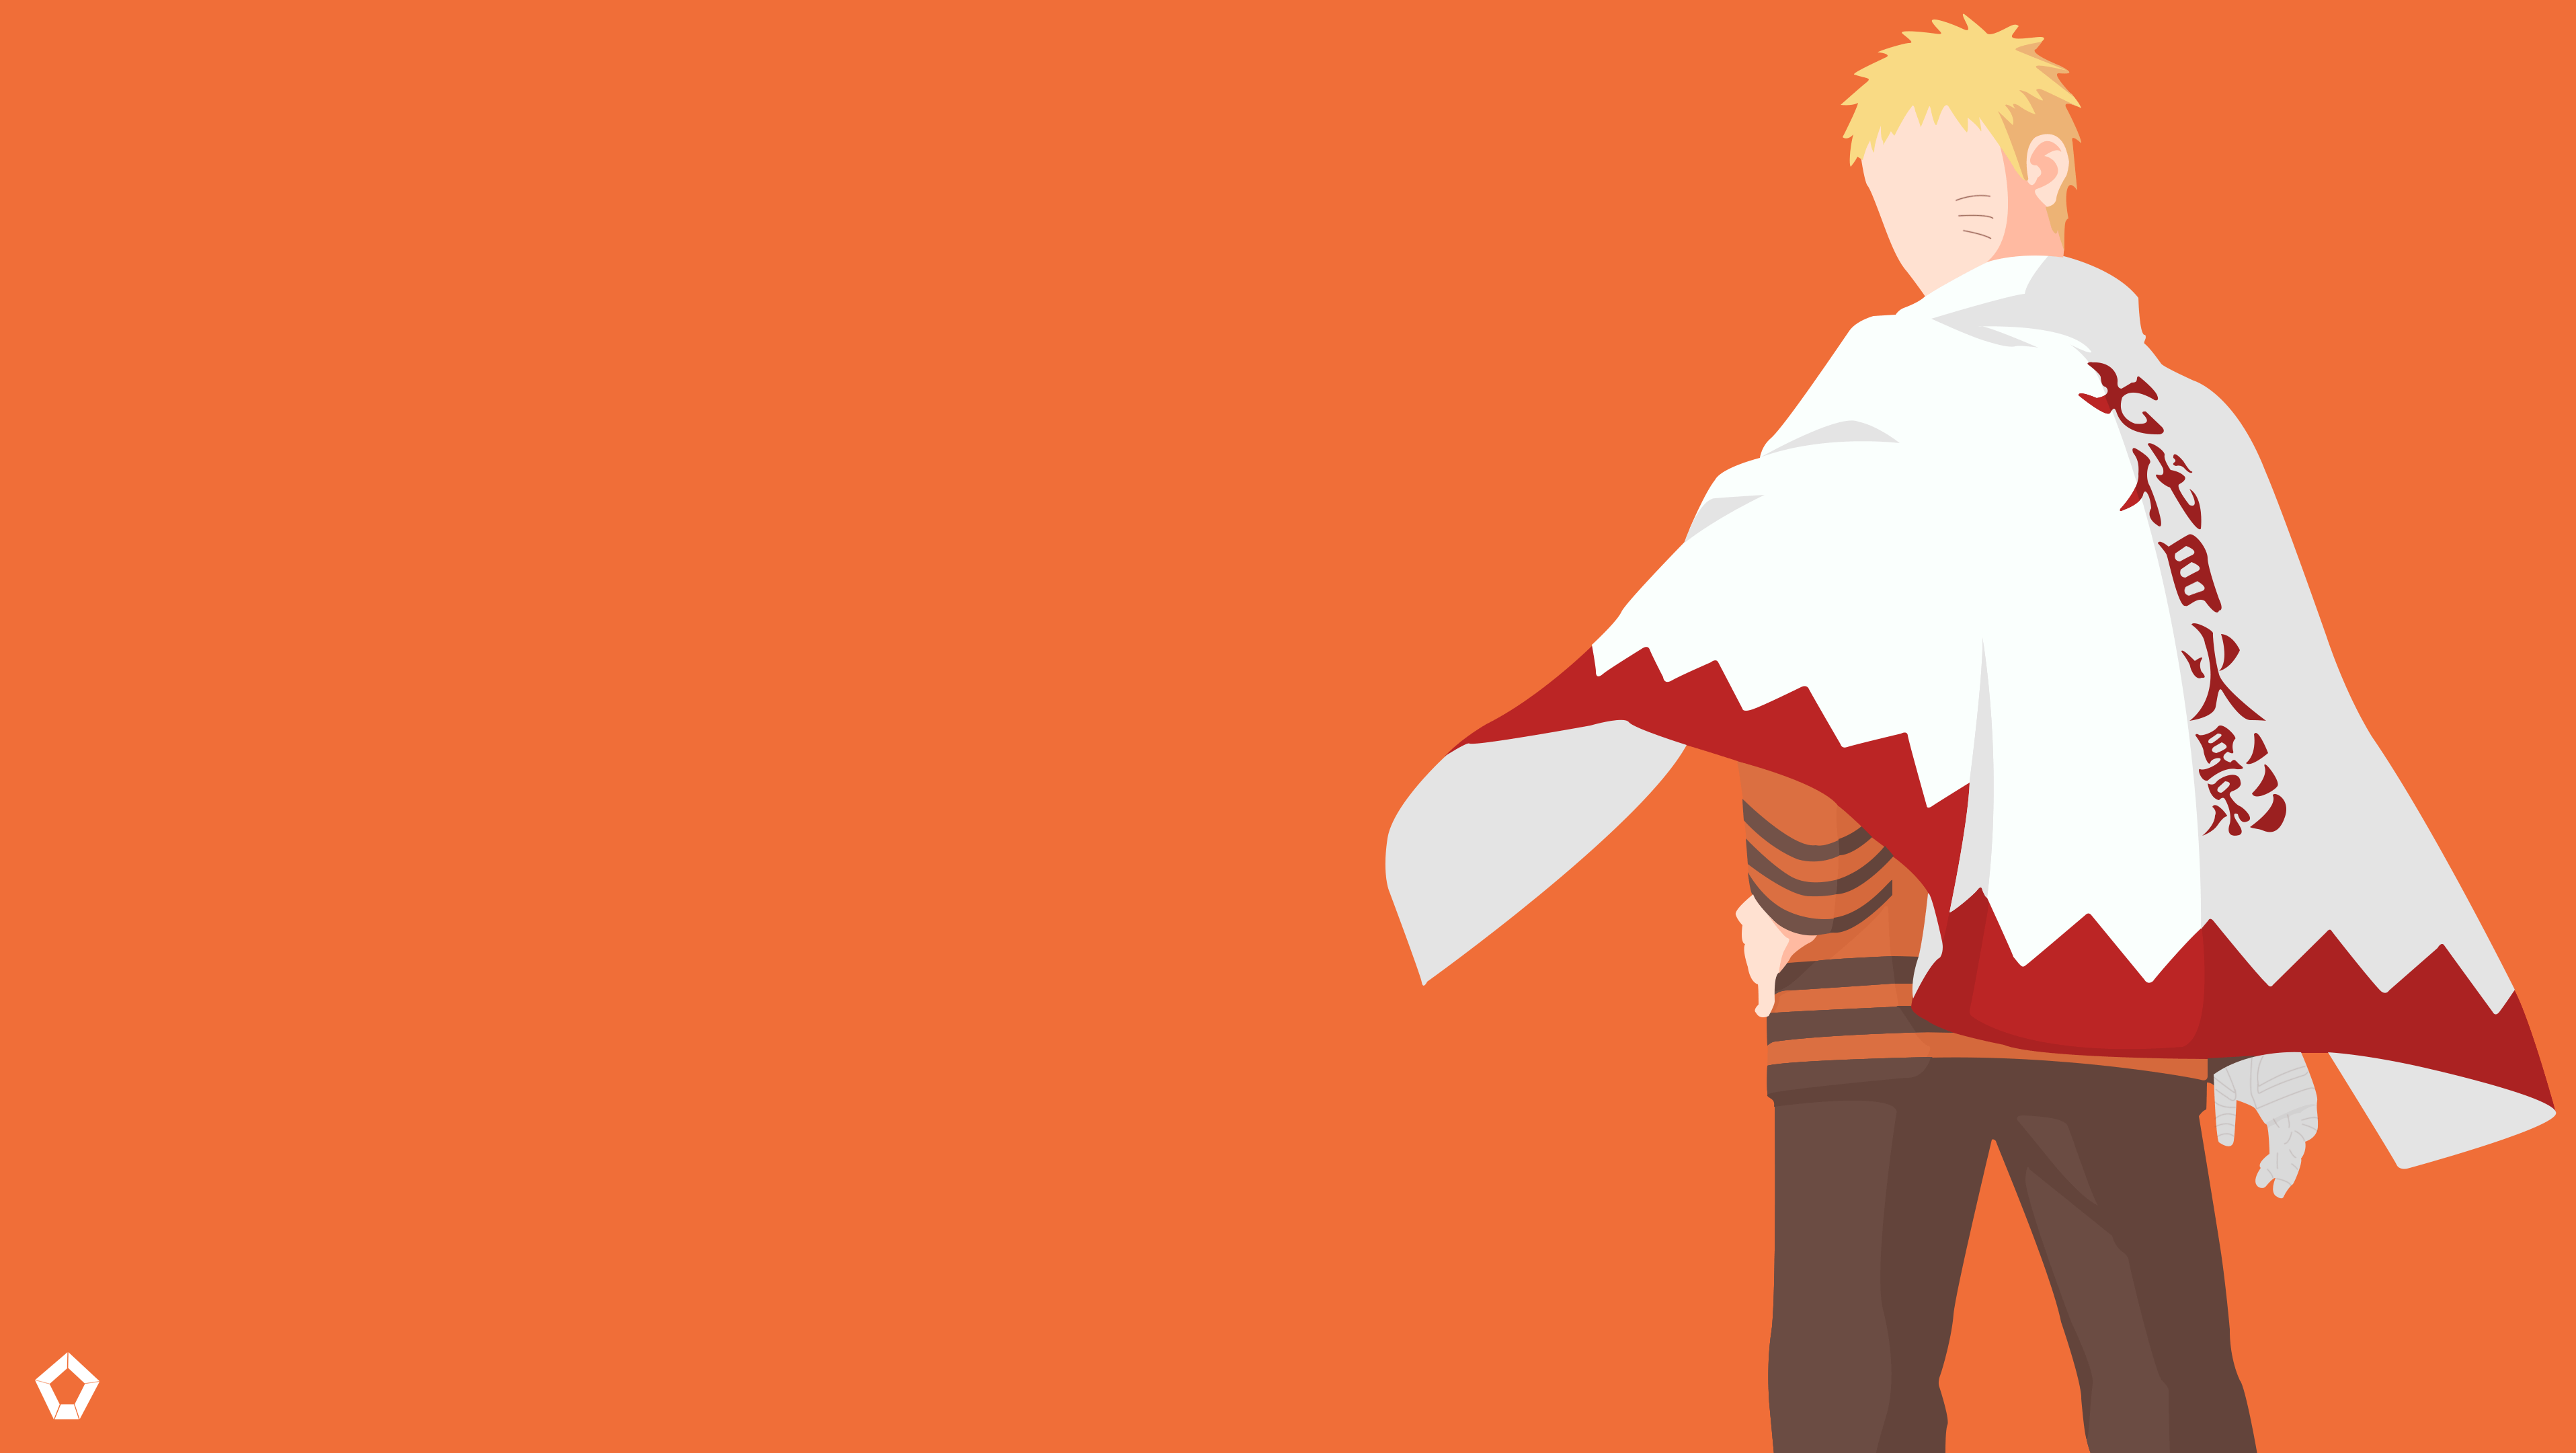 Free download Naruto Hokage wallpapers HD free 487268 Incoming search terms  2560x1600 for your Desktop Mobile  Tablet  Explore 44 Hokage  Background  Naruto Shippuden Wallpaper Hokage Hokage Naruto Wallpaper Naruto  Hokage iPhone Wallpapers